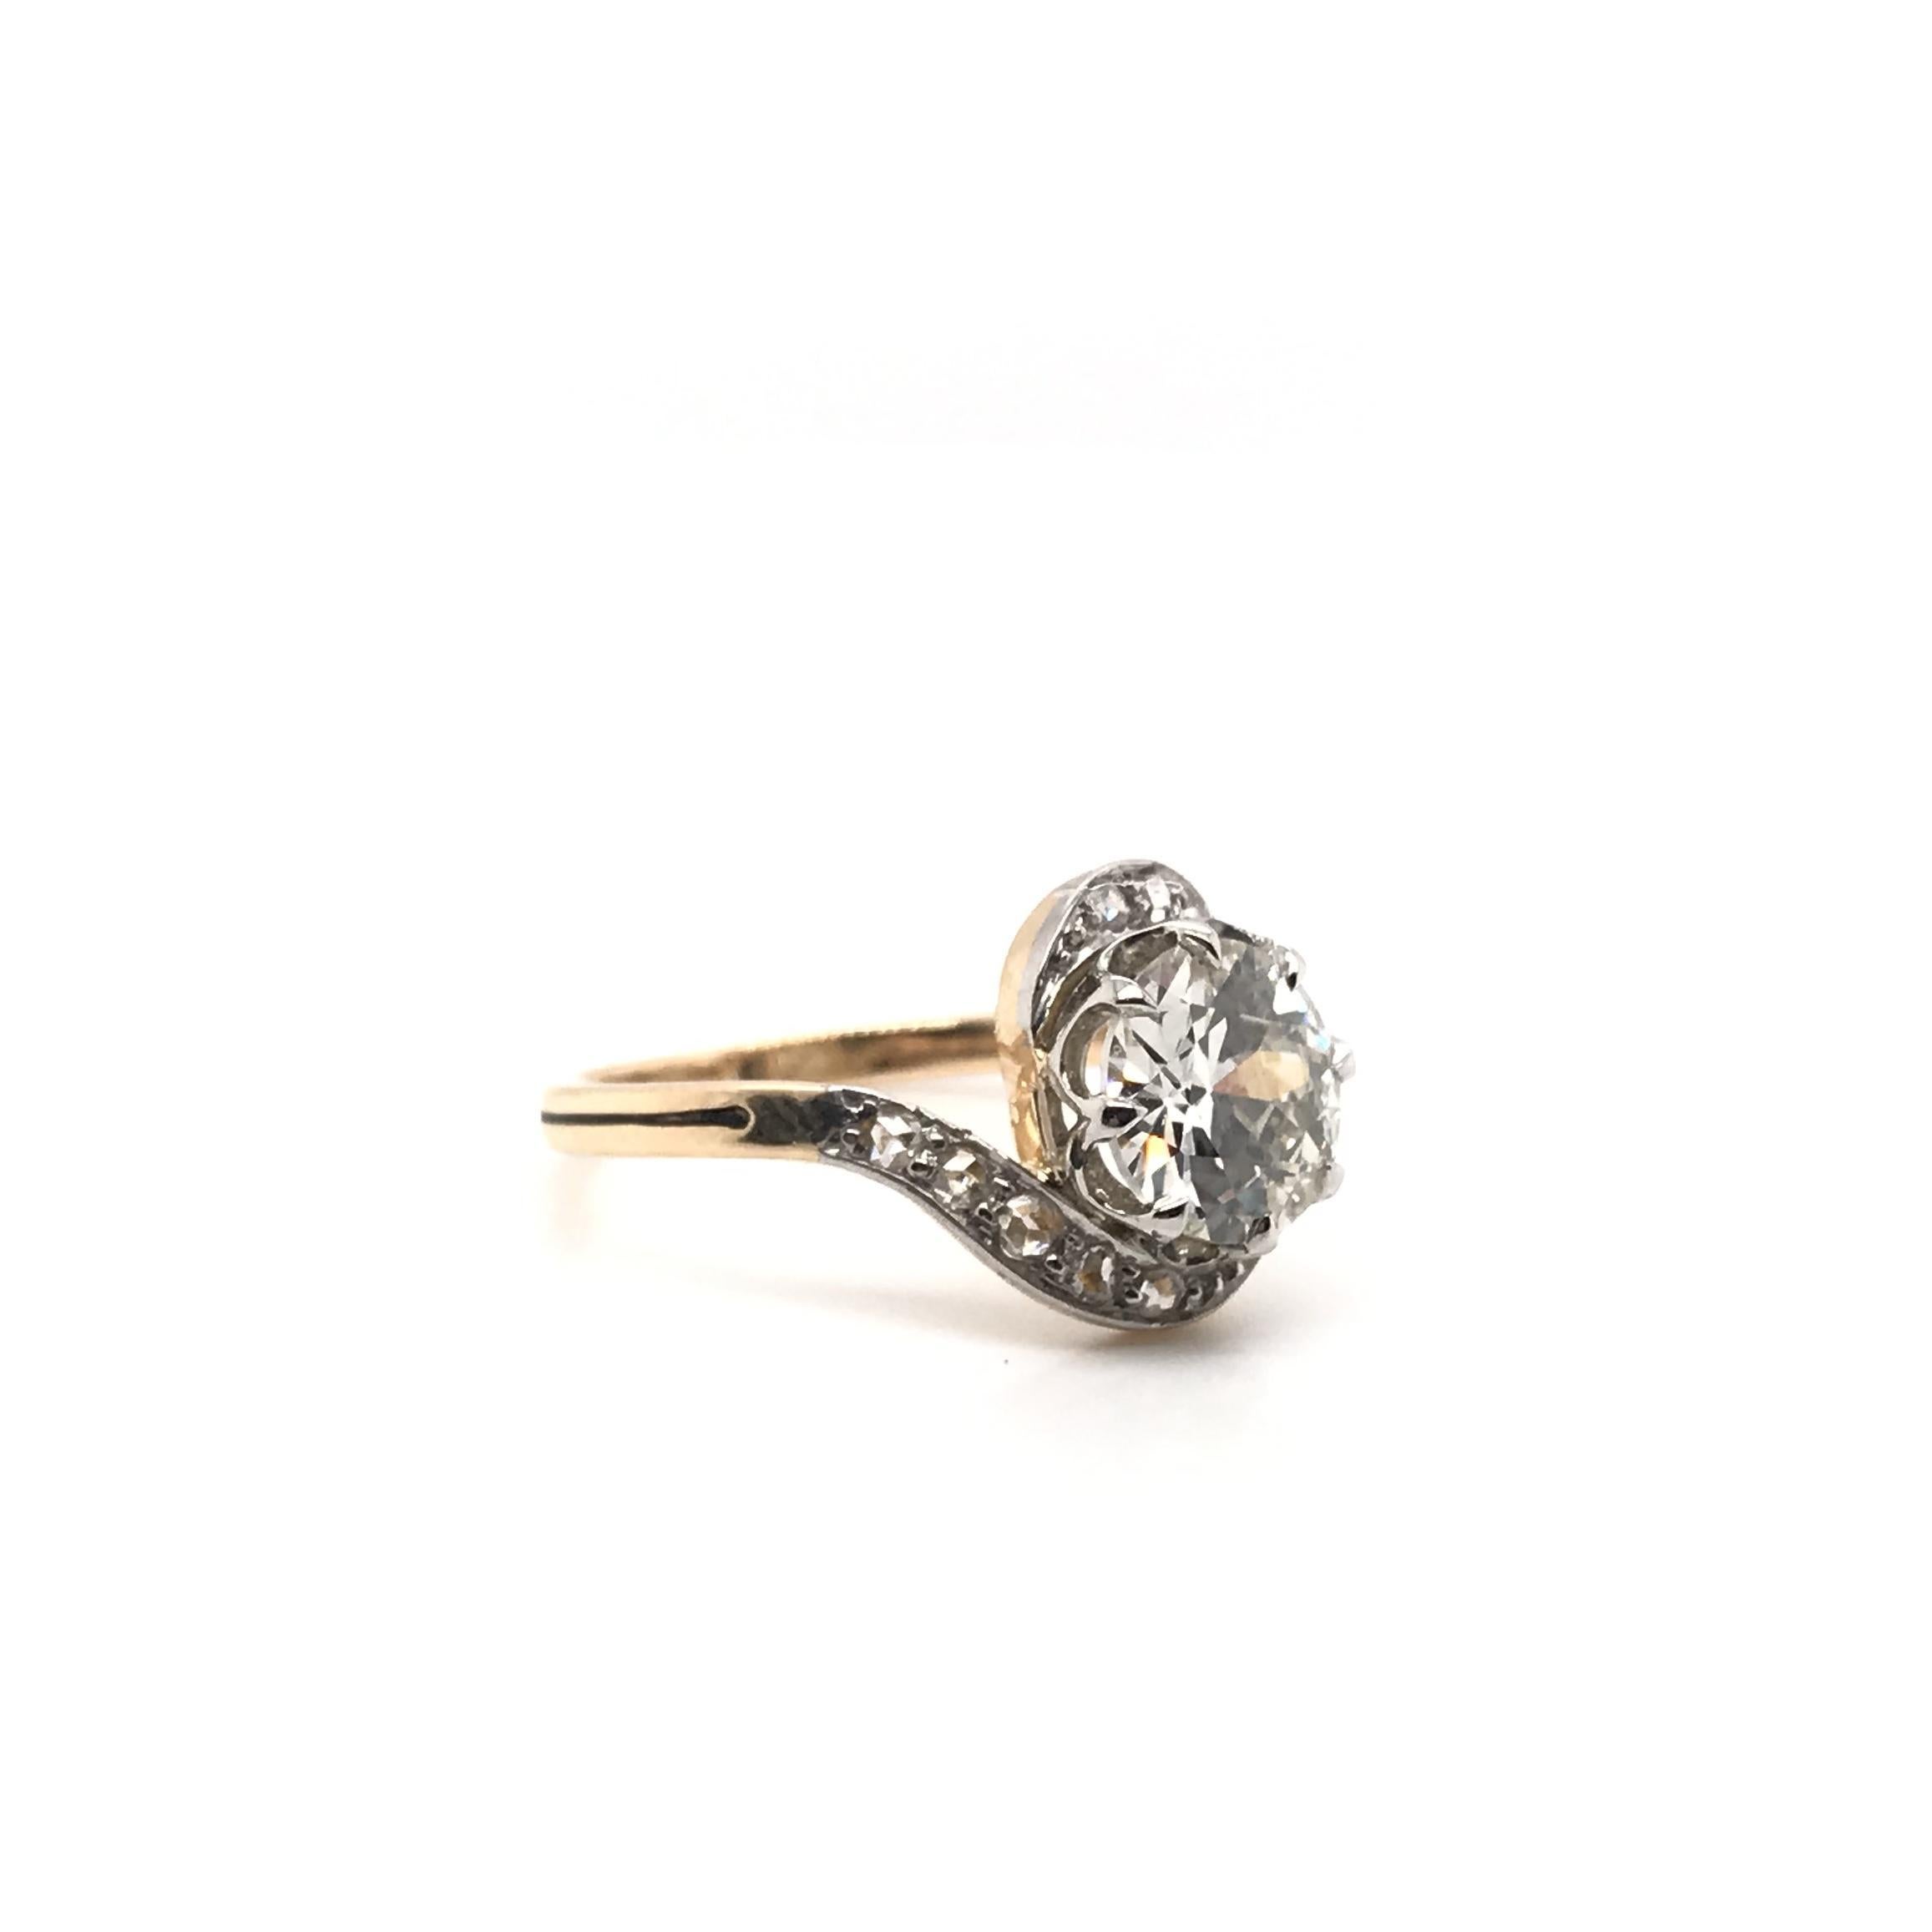 This antique piece was crafted sometime during the Art Nouveau design period (1890-1910). The center diamond is an antique Old European cut and has been certified by the Gemological Institute of America. The diamond grades approximately L in color